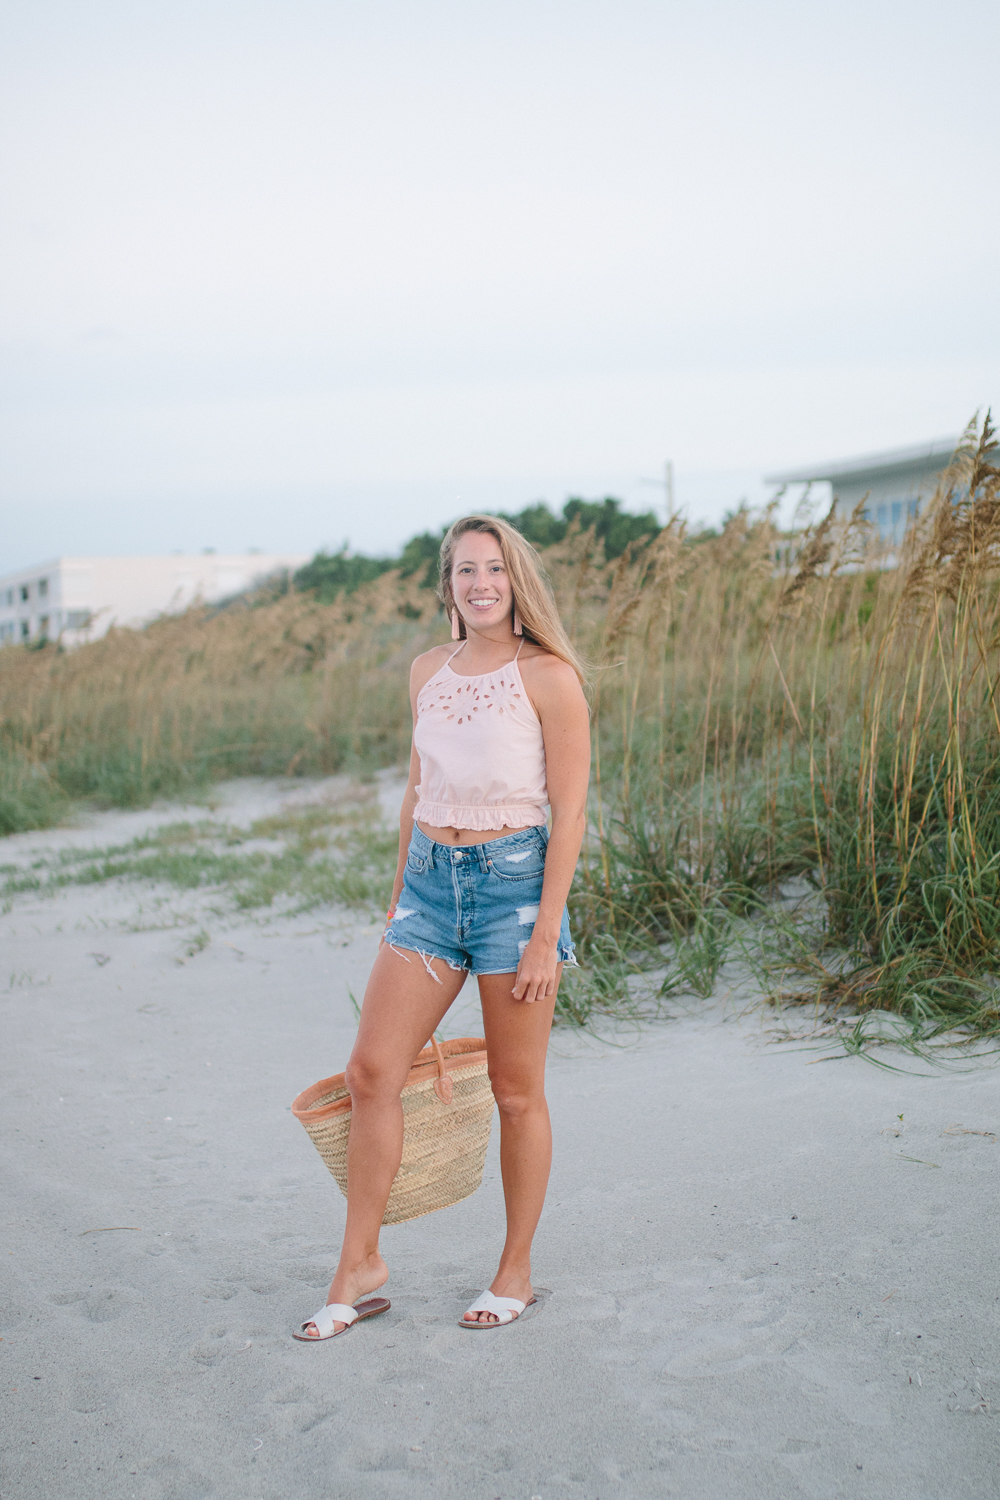 What to Wear to the Beach: A Casual Summer Outfit featuring an Aerie Crop Top, Denim Shorts, Sandals, Statement Earrings and a Beach Bag | Sunshine Style